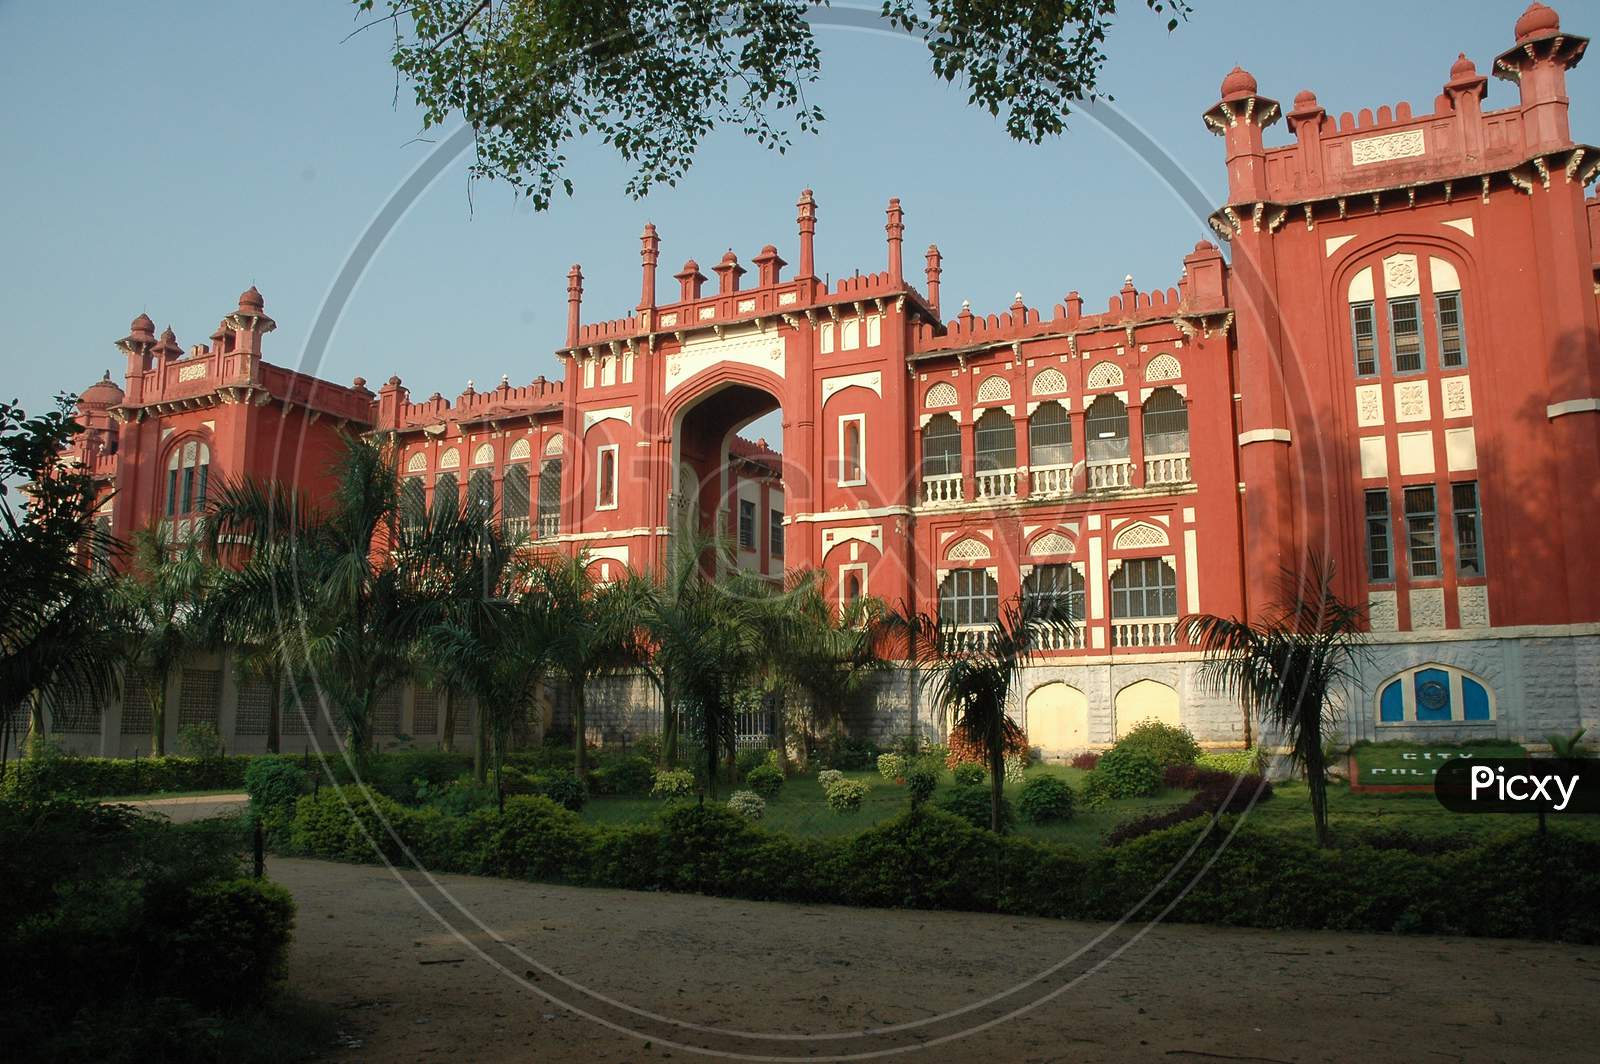 Government City College Main Building in Hyderabad